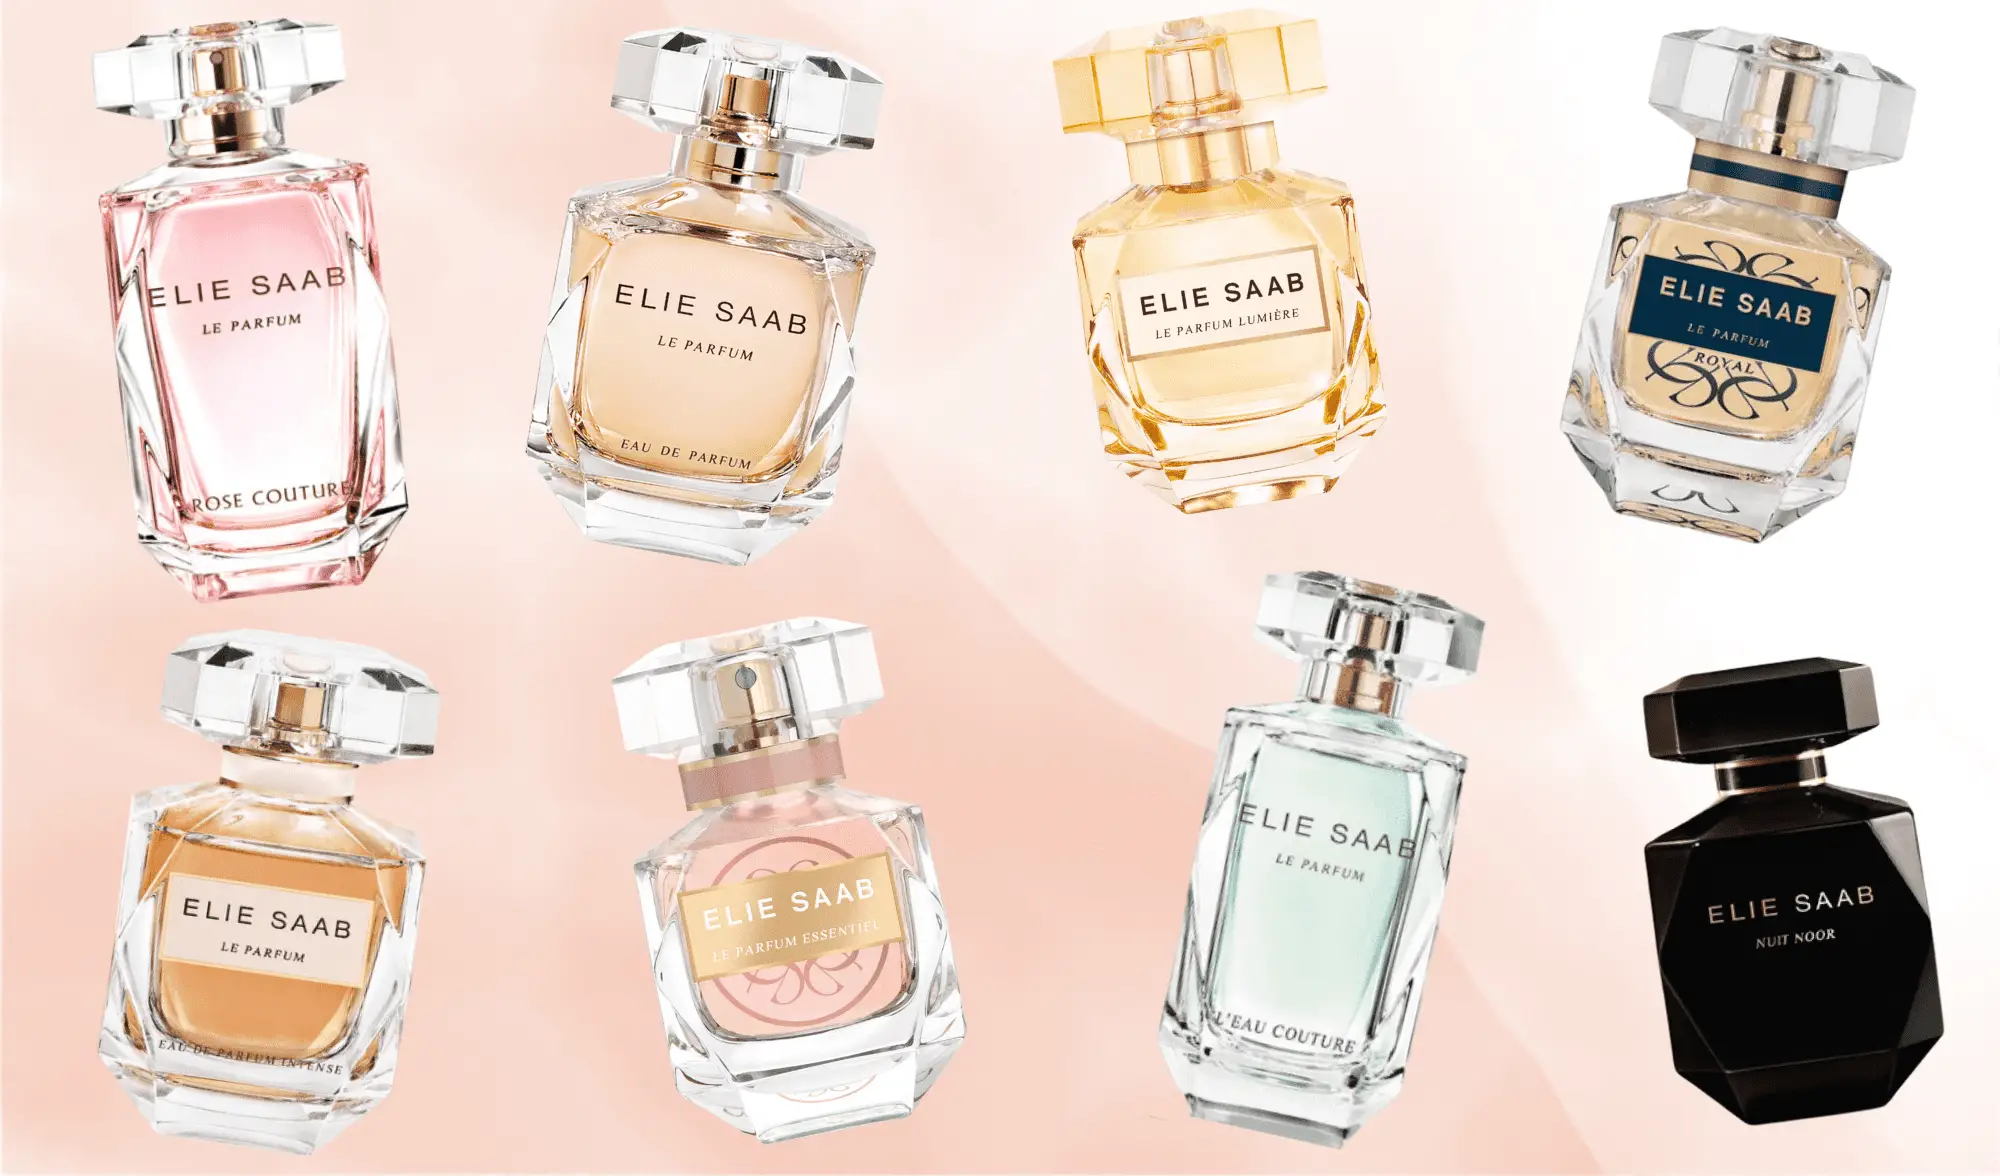 The Ultimate Guide To The Elie Saab Le Parfum Fragrances